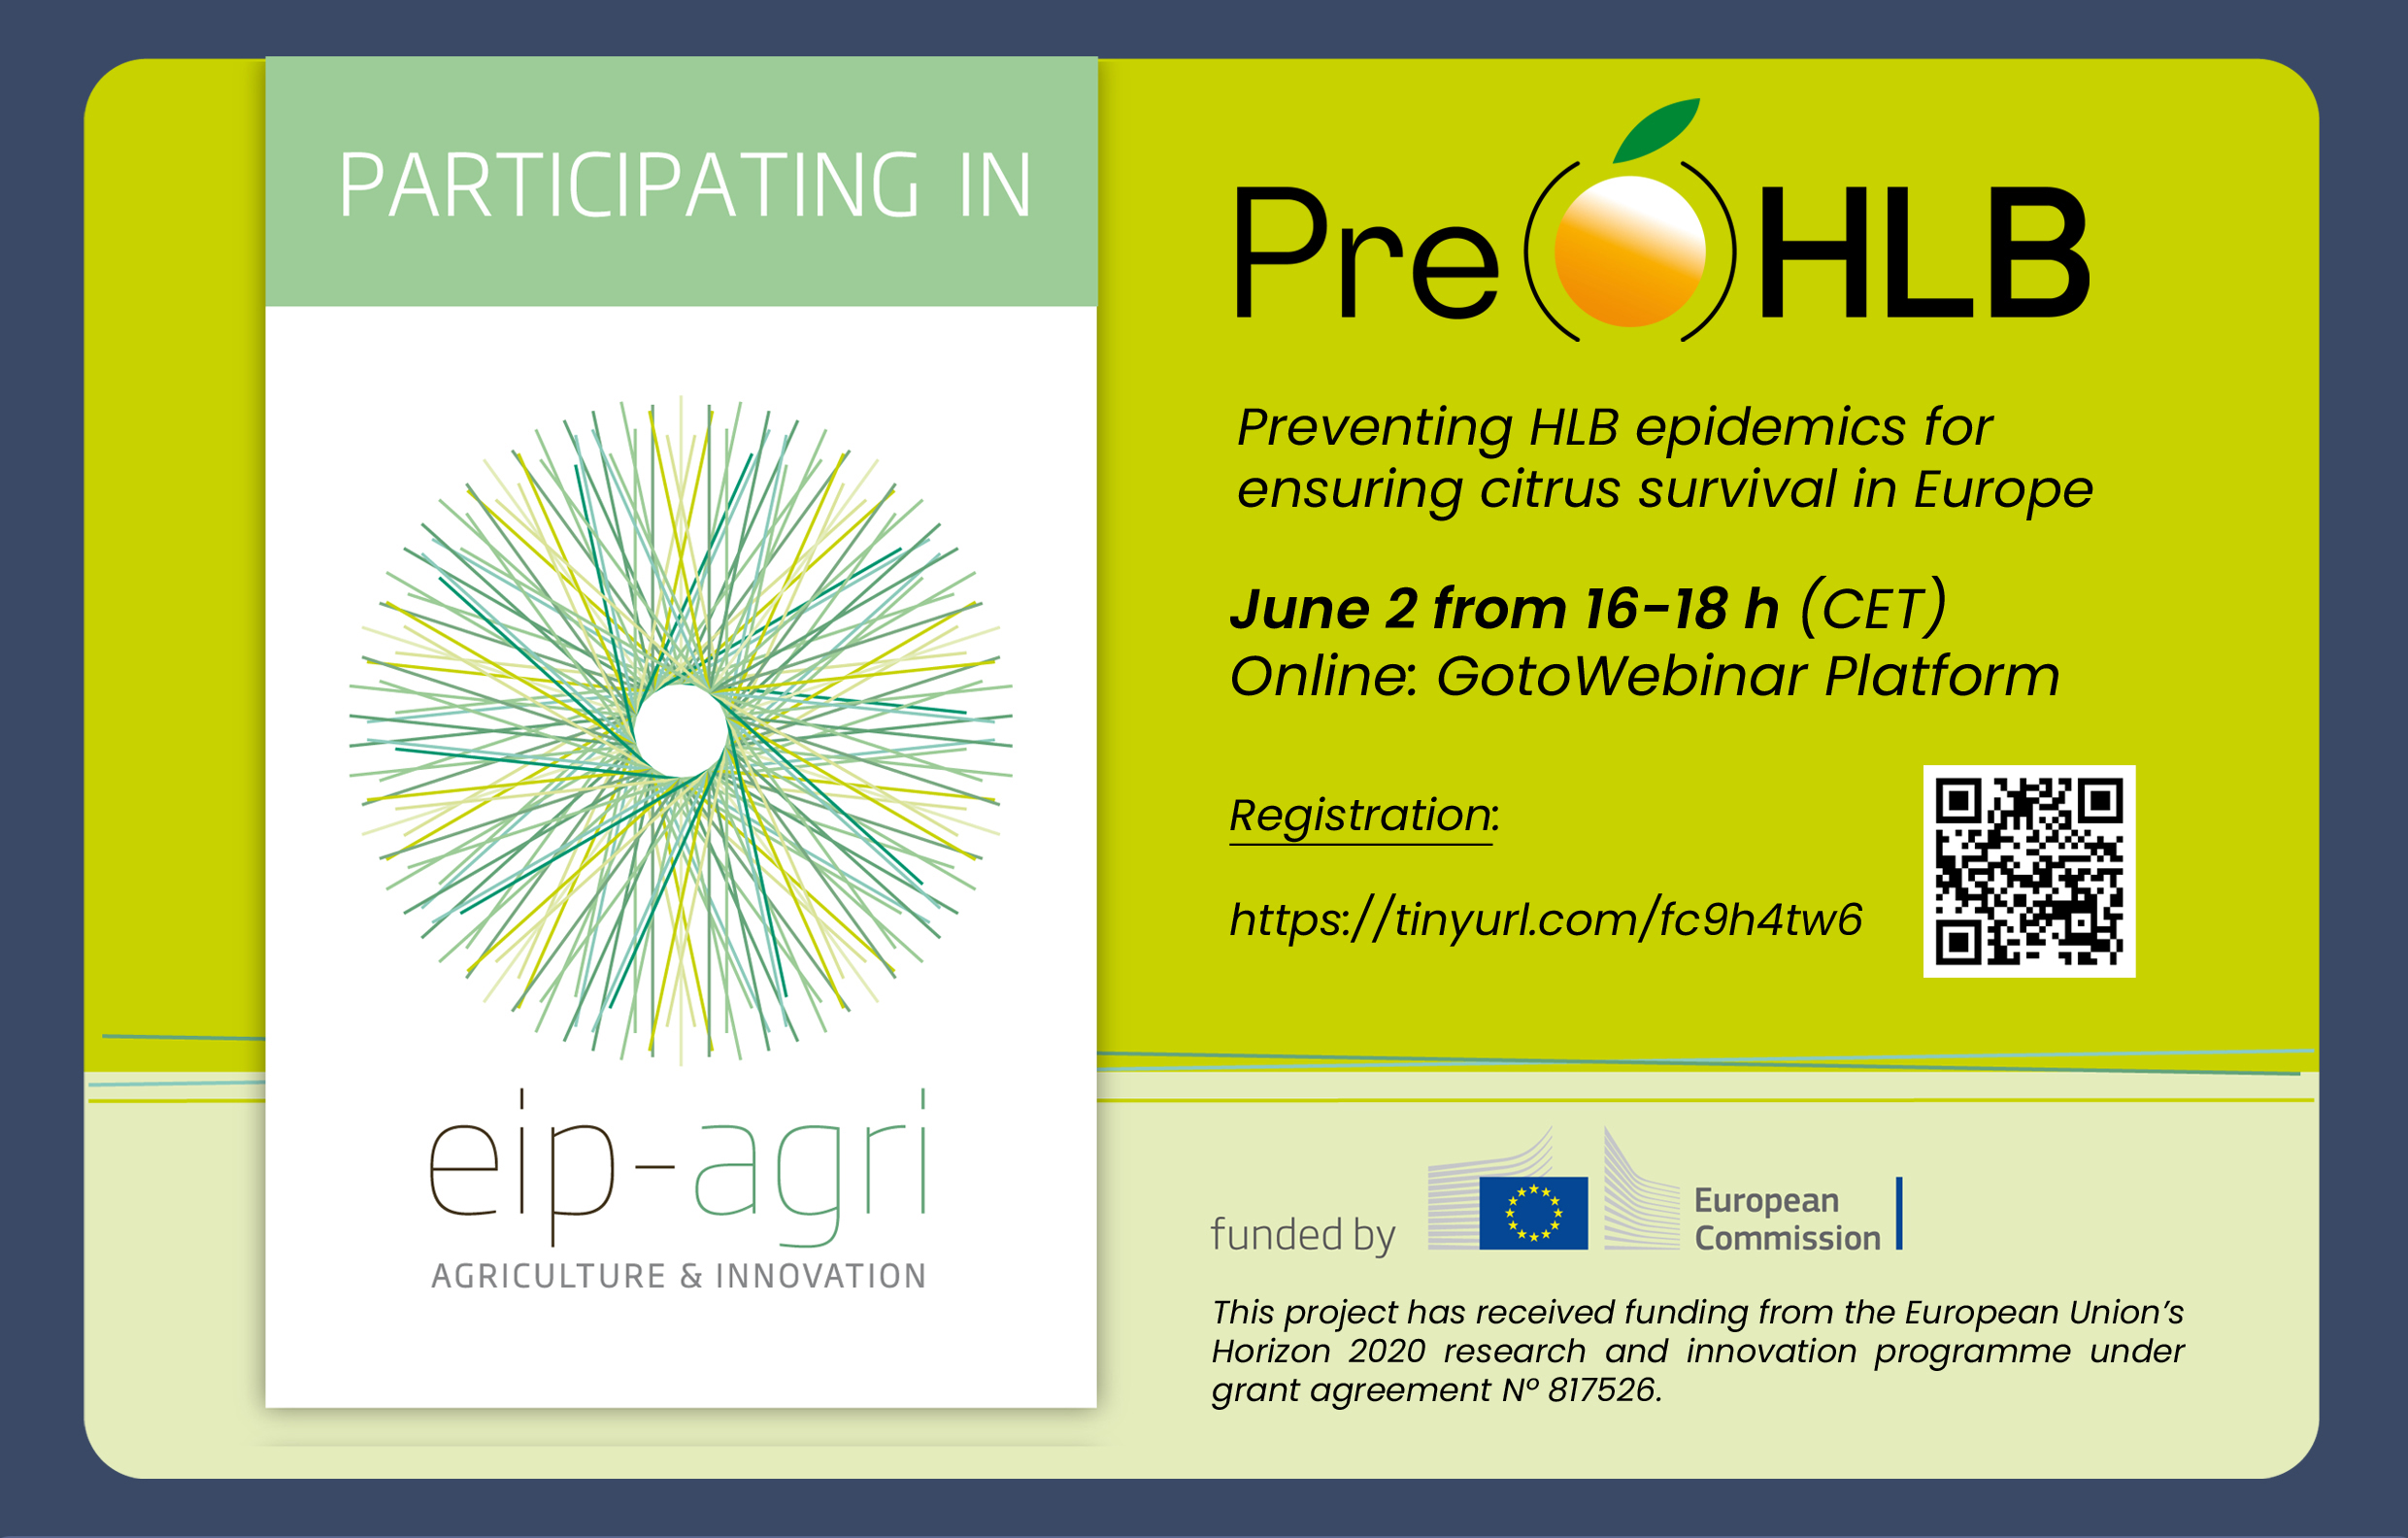 The PRE-HLB project discusses greening contingency plans and procedures in an online event.